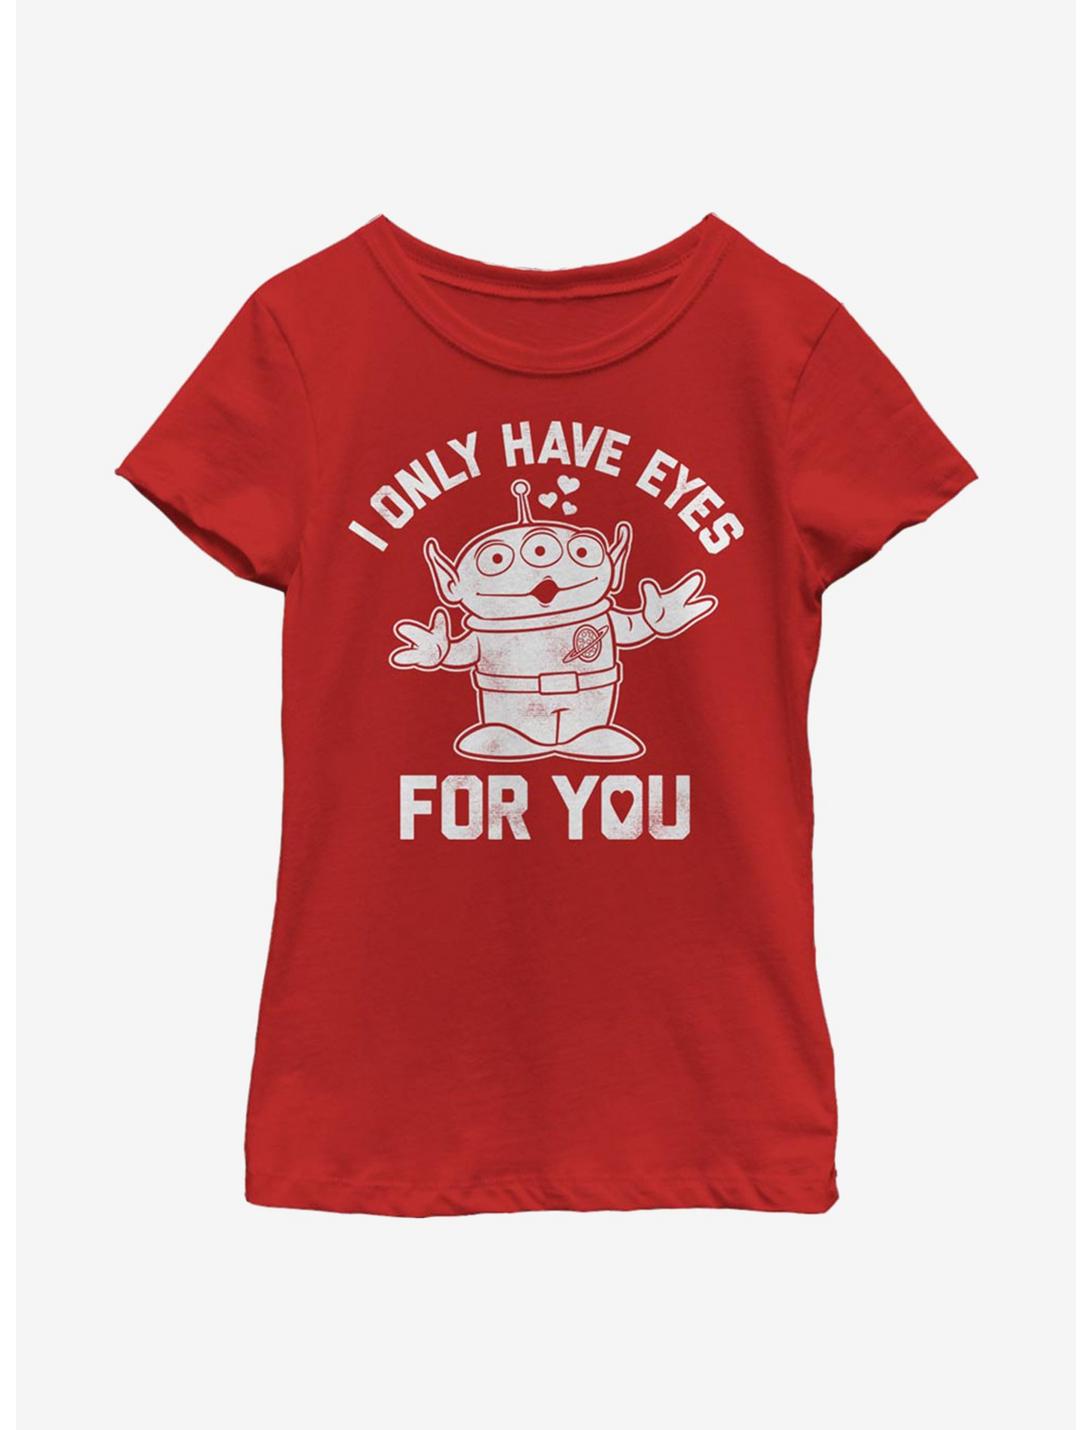 Disney Pixar Toy Story Alien Eyes For You Youth Girls T-Shirt, RED, hi-res